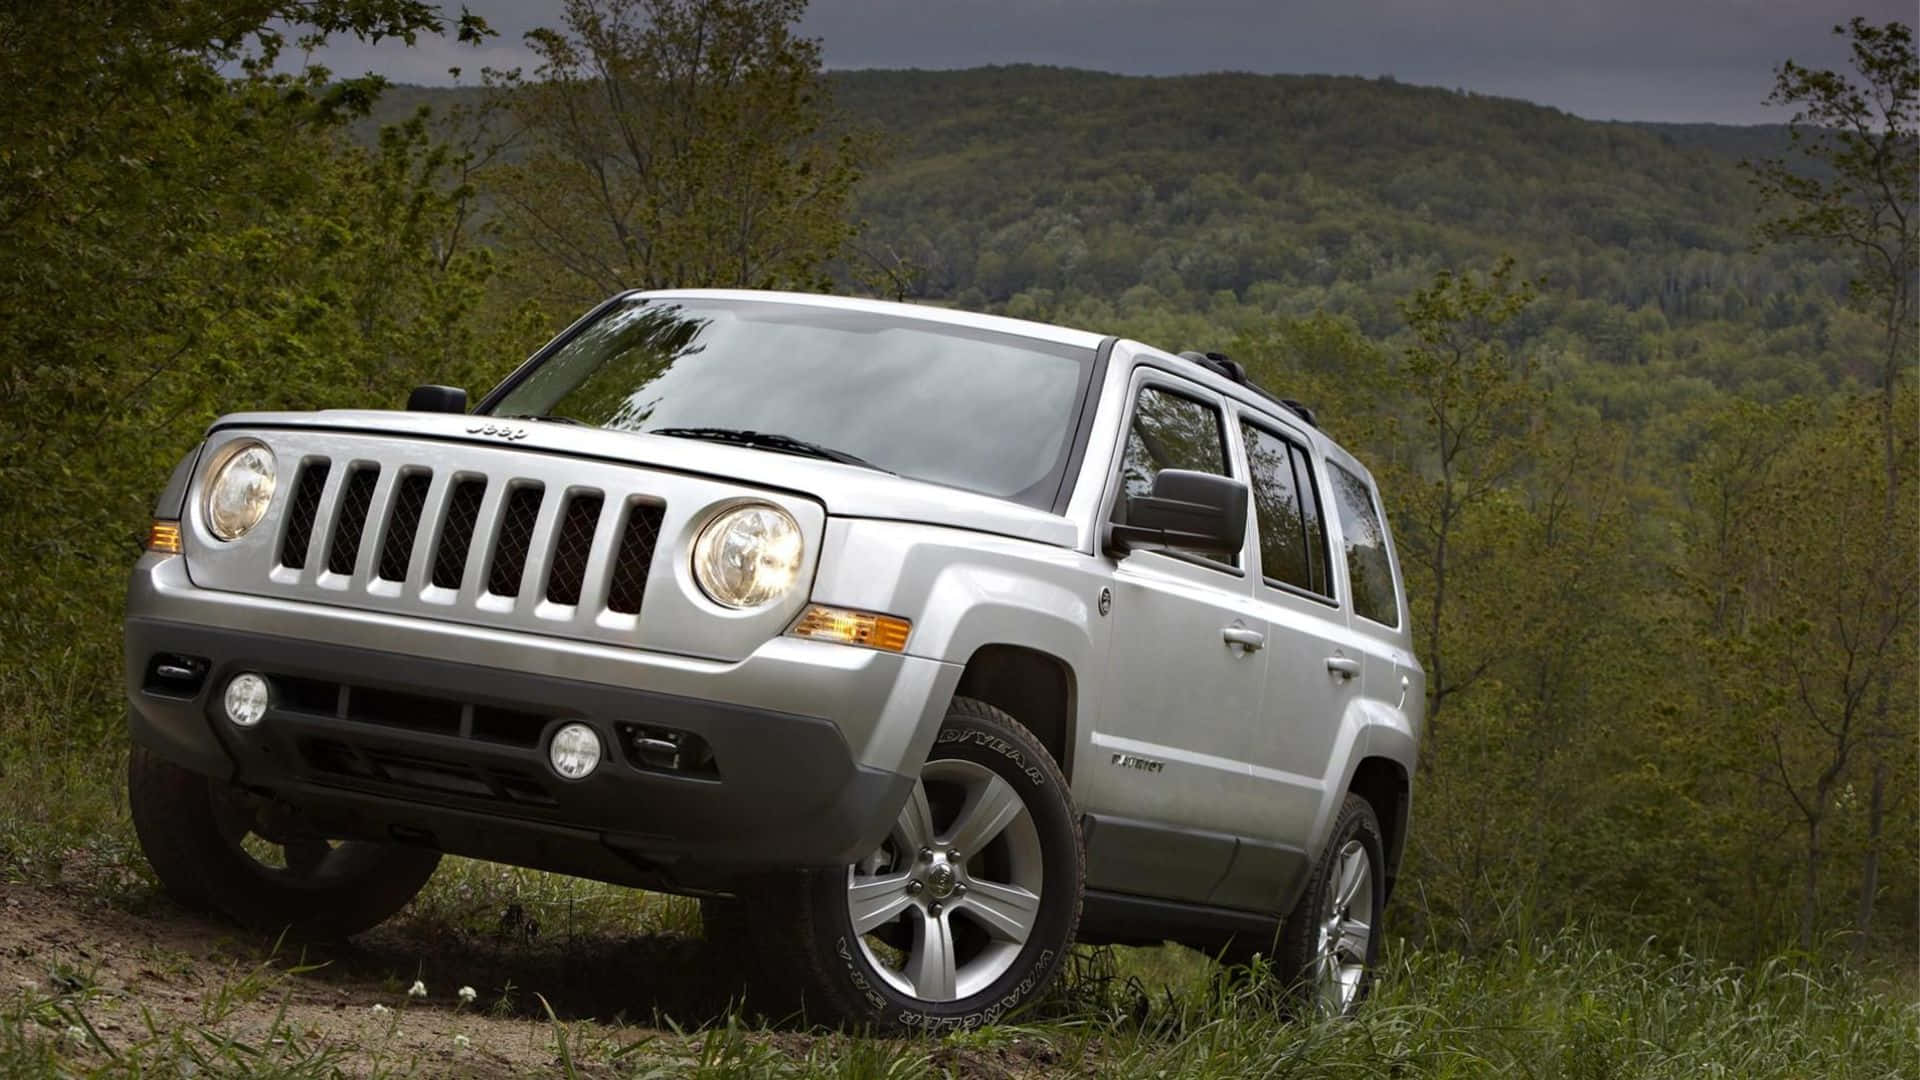 Stunning Jeep Patriot in the Great Outdoors Wallpaper